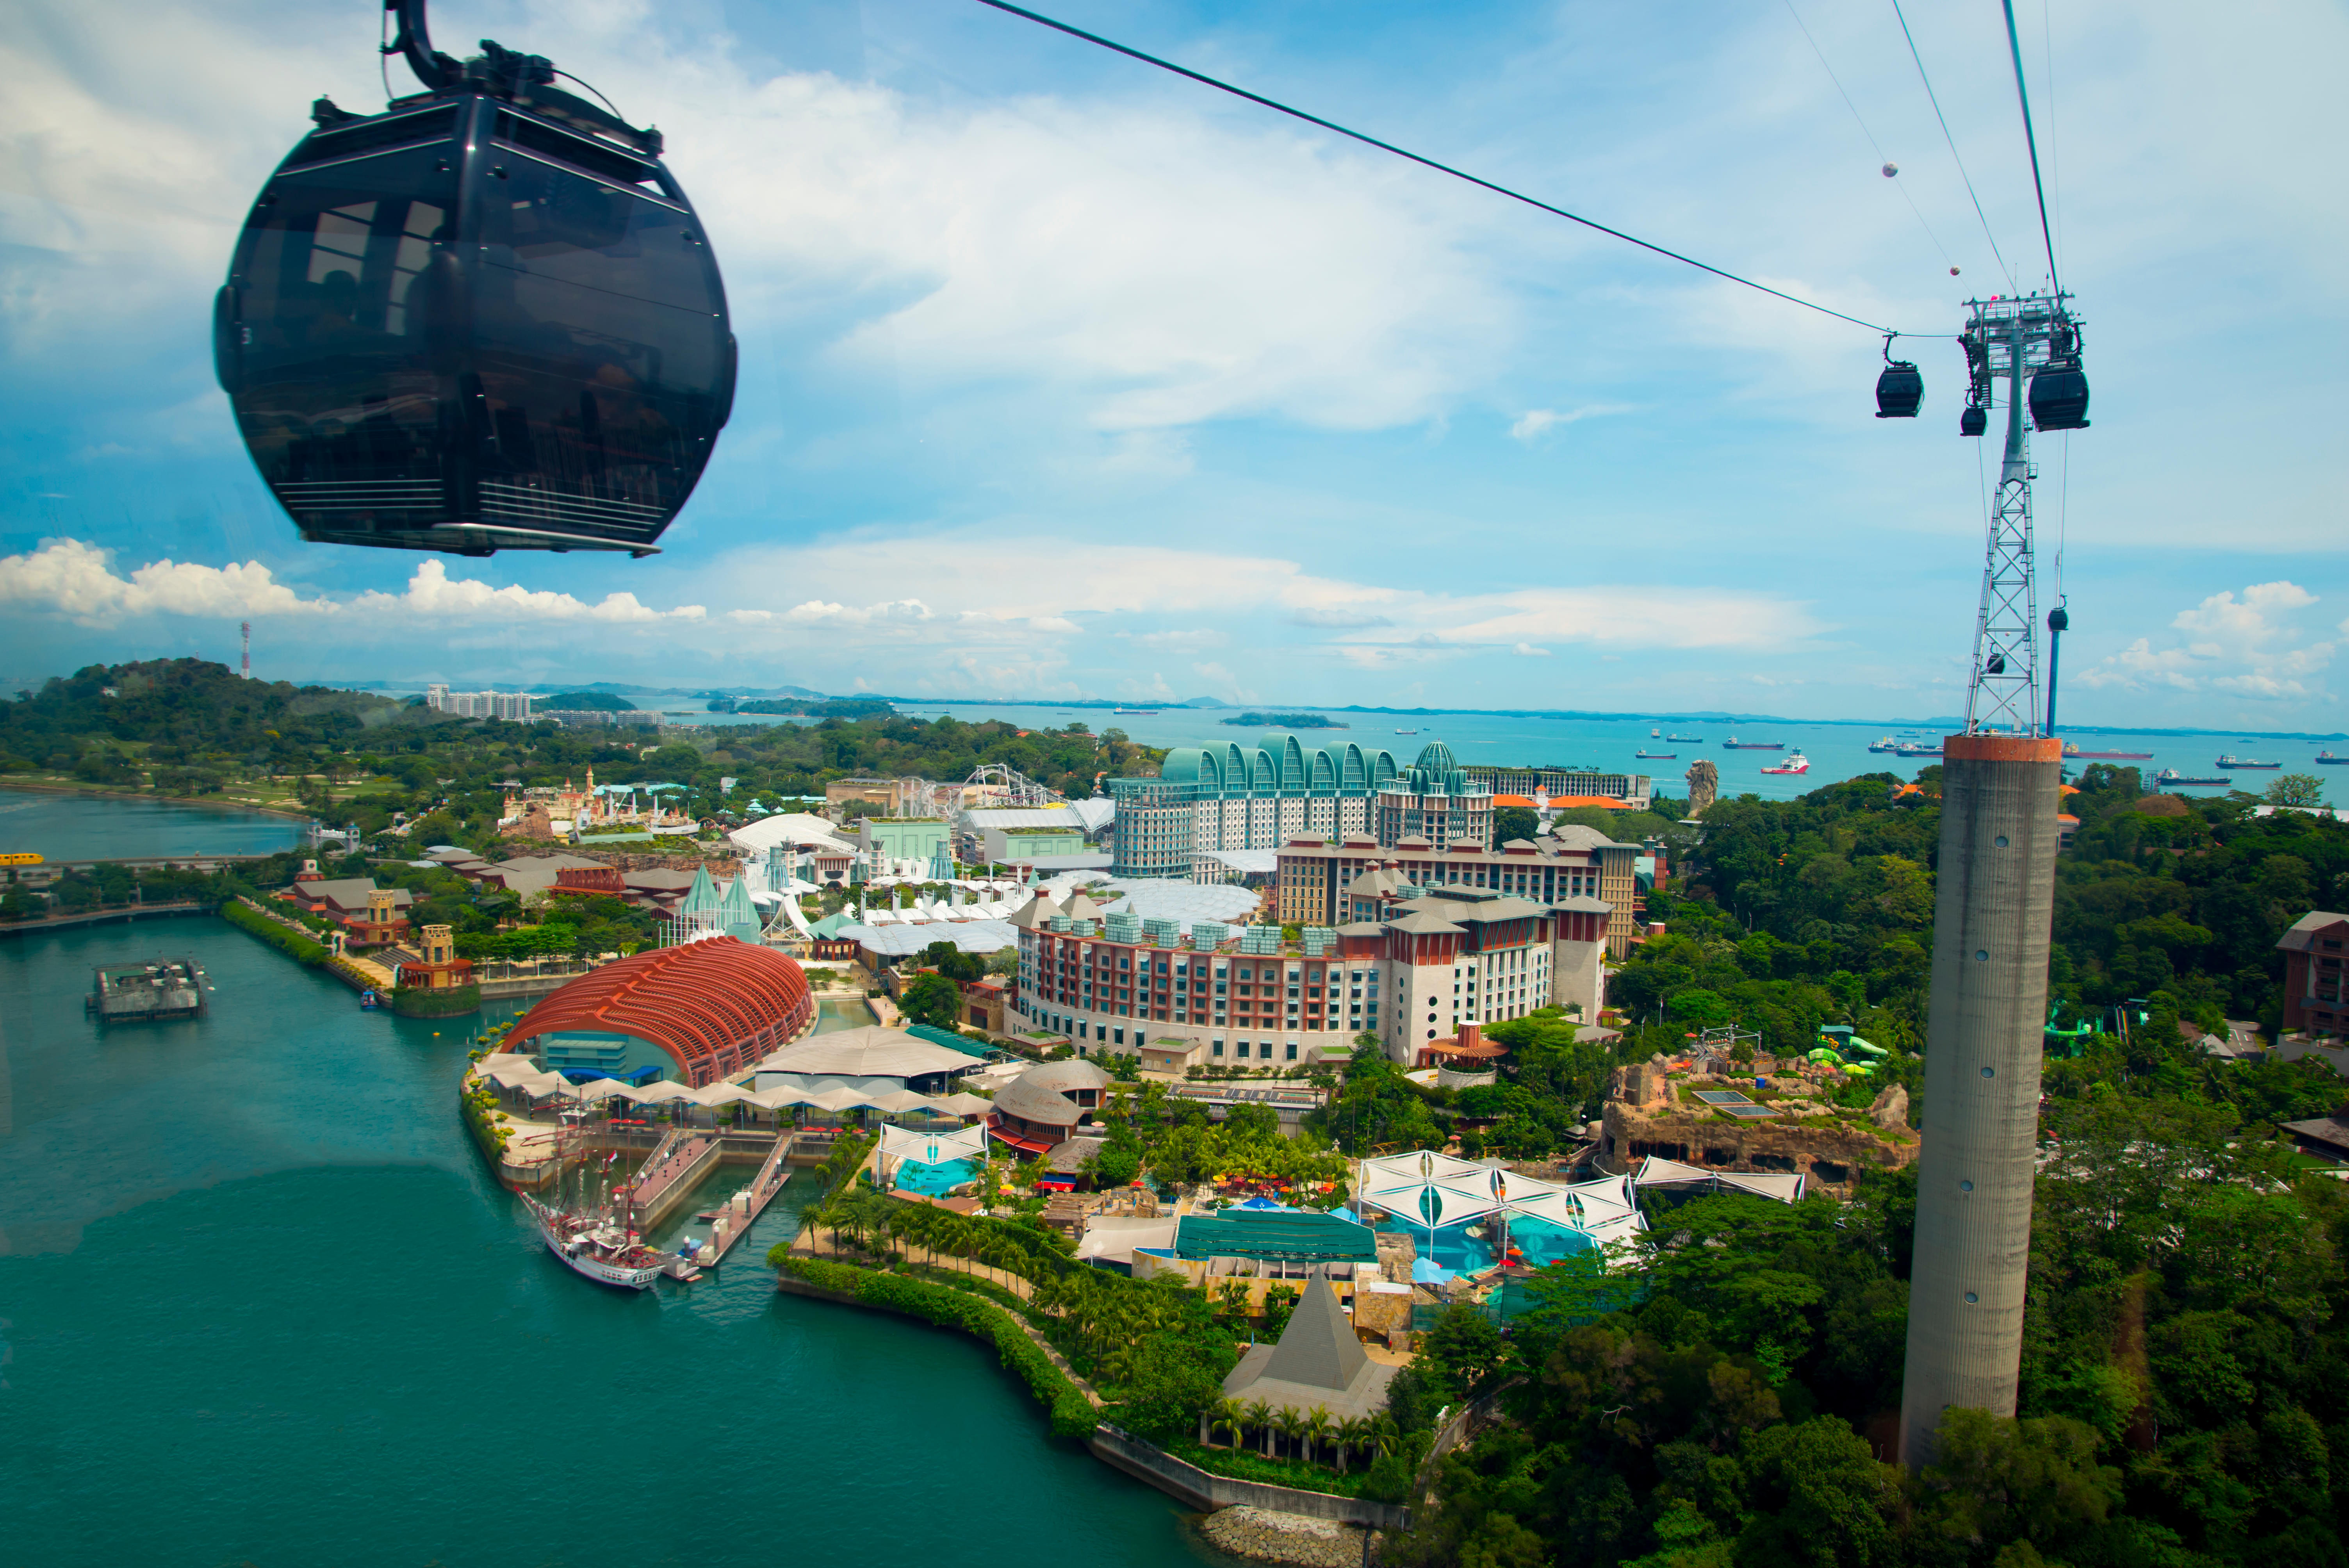 Sentosa Island's skyline is a sight to behold 